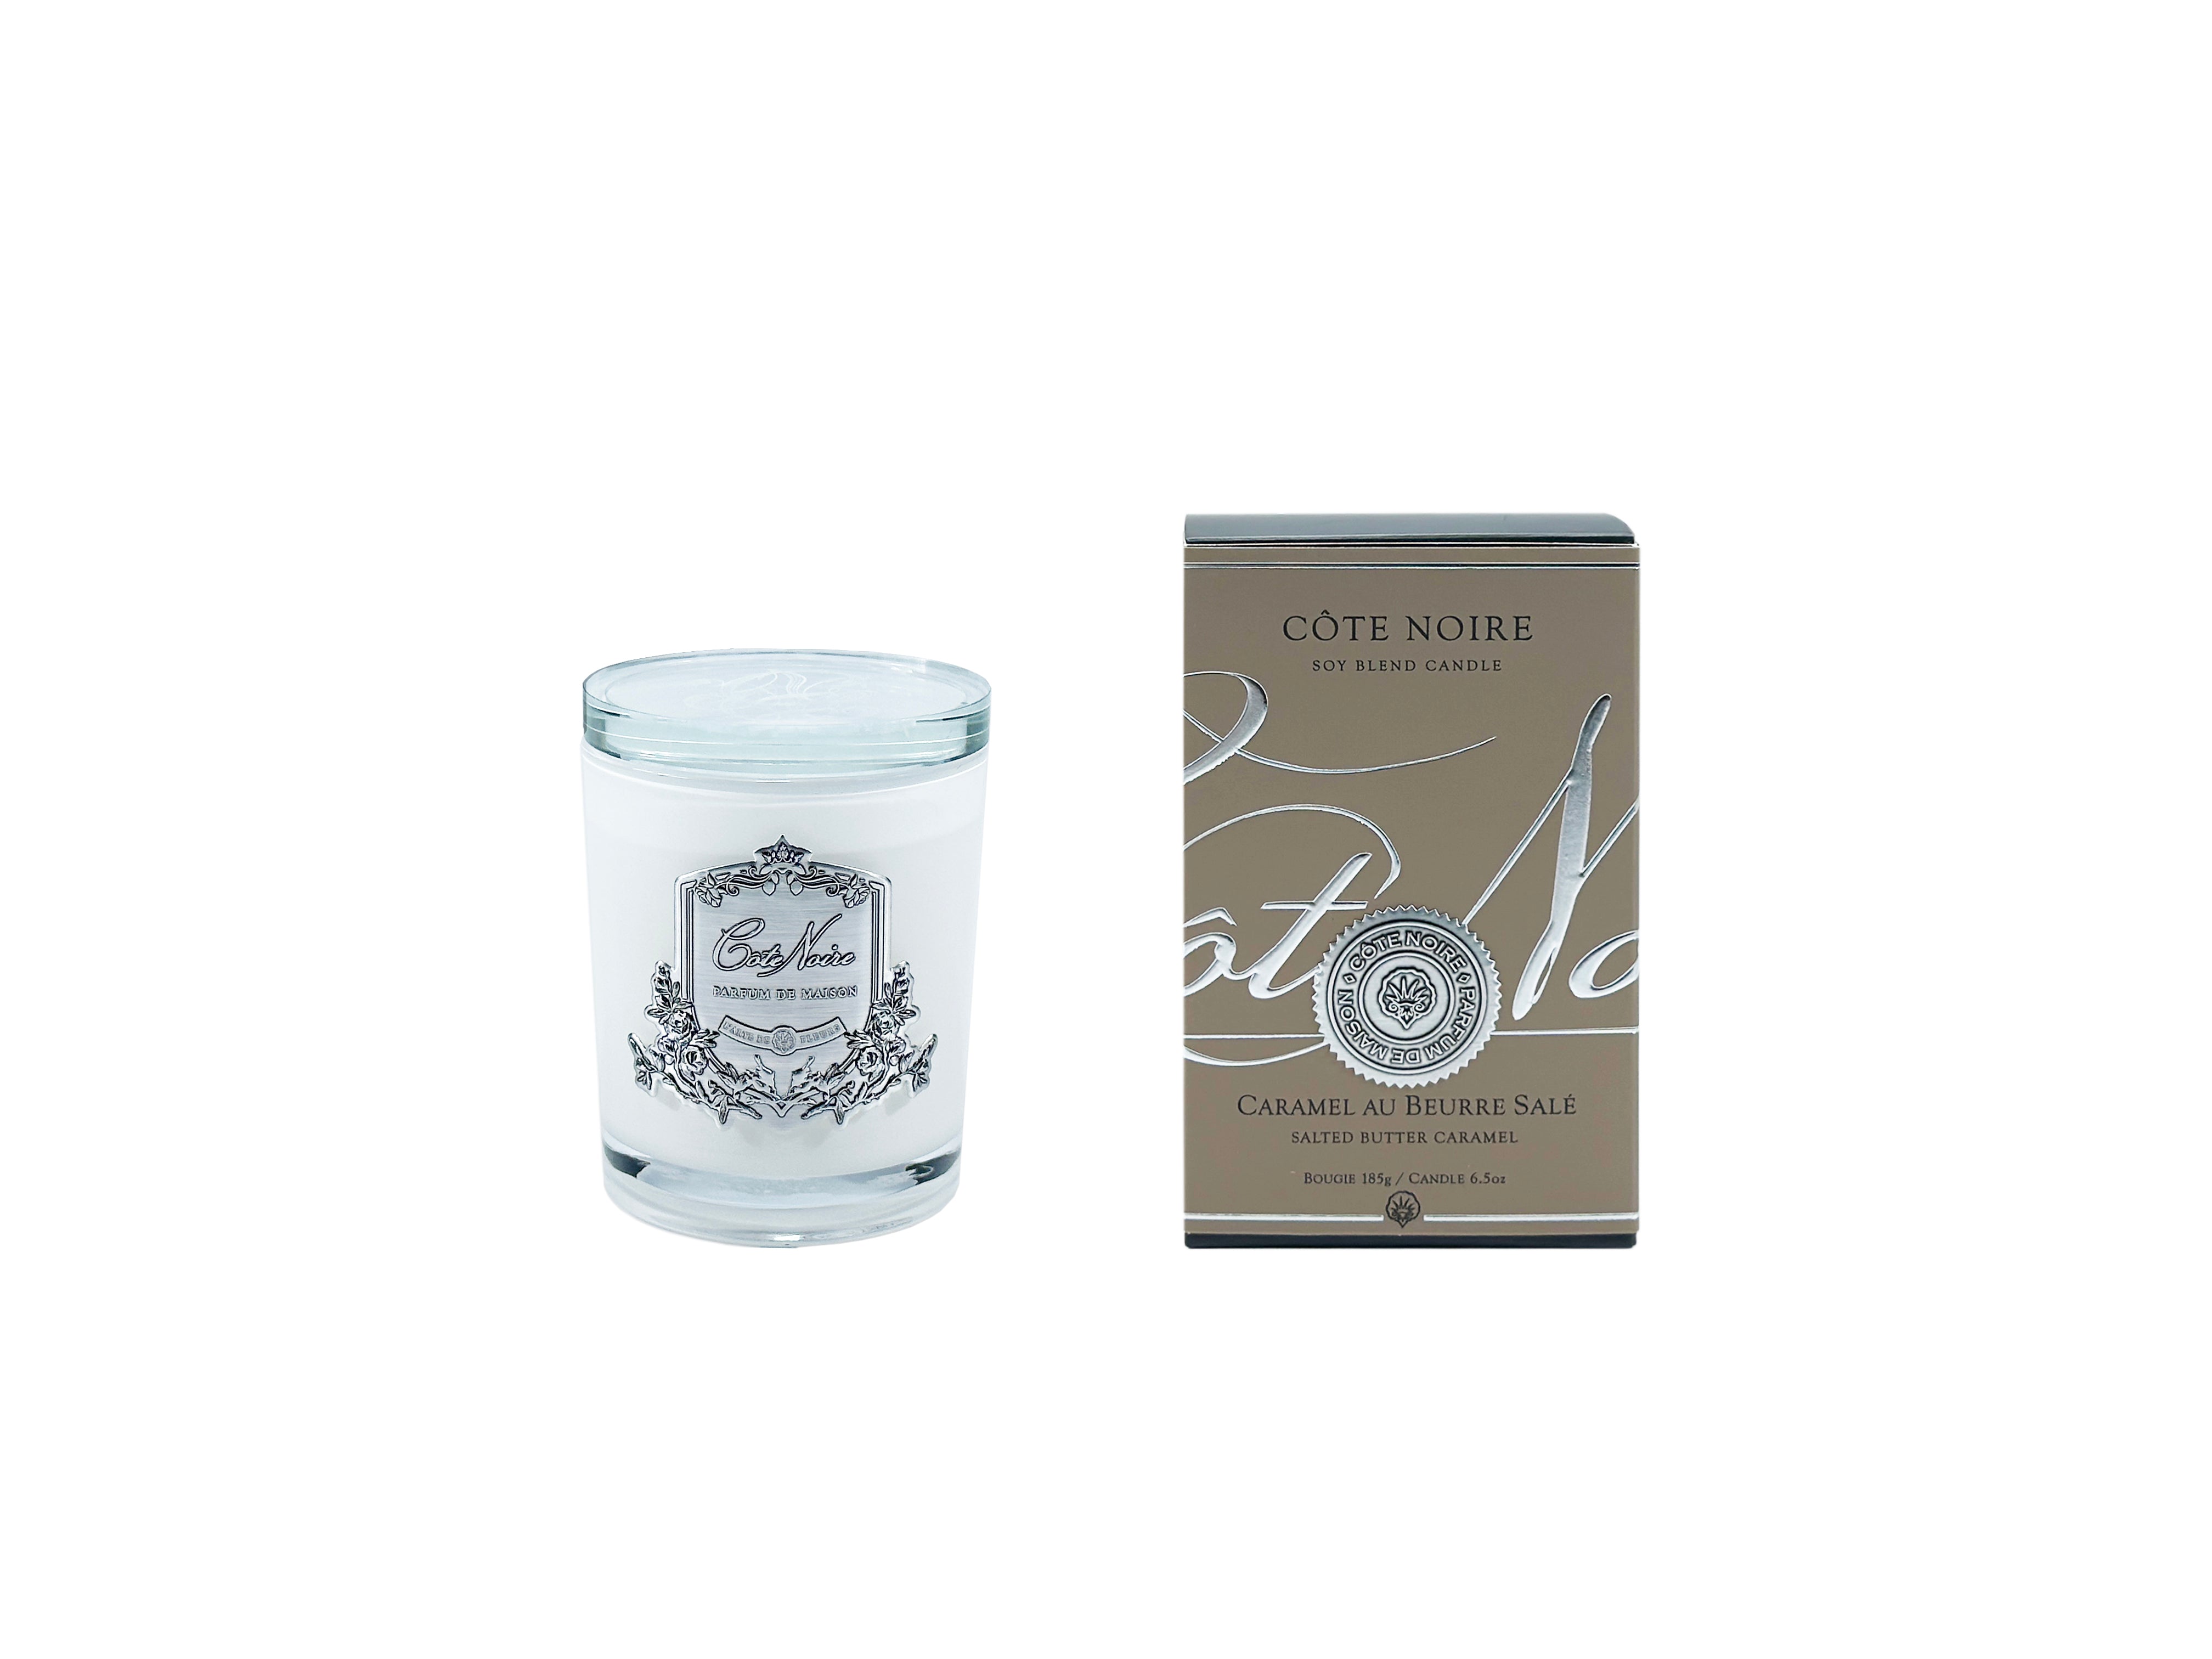 Cote Noire - Salted Butter Caramel - 185g Silver Candle